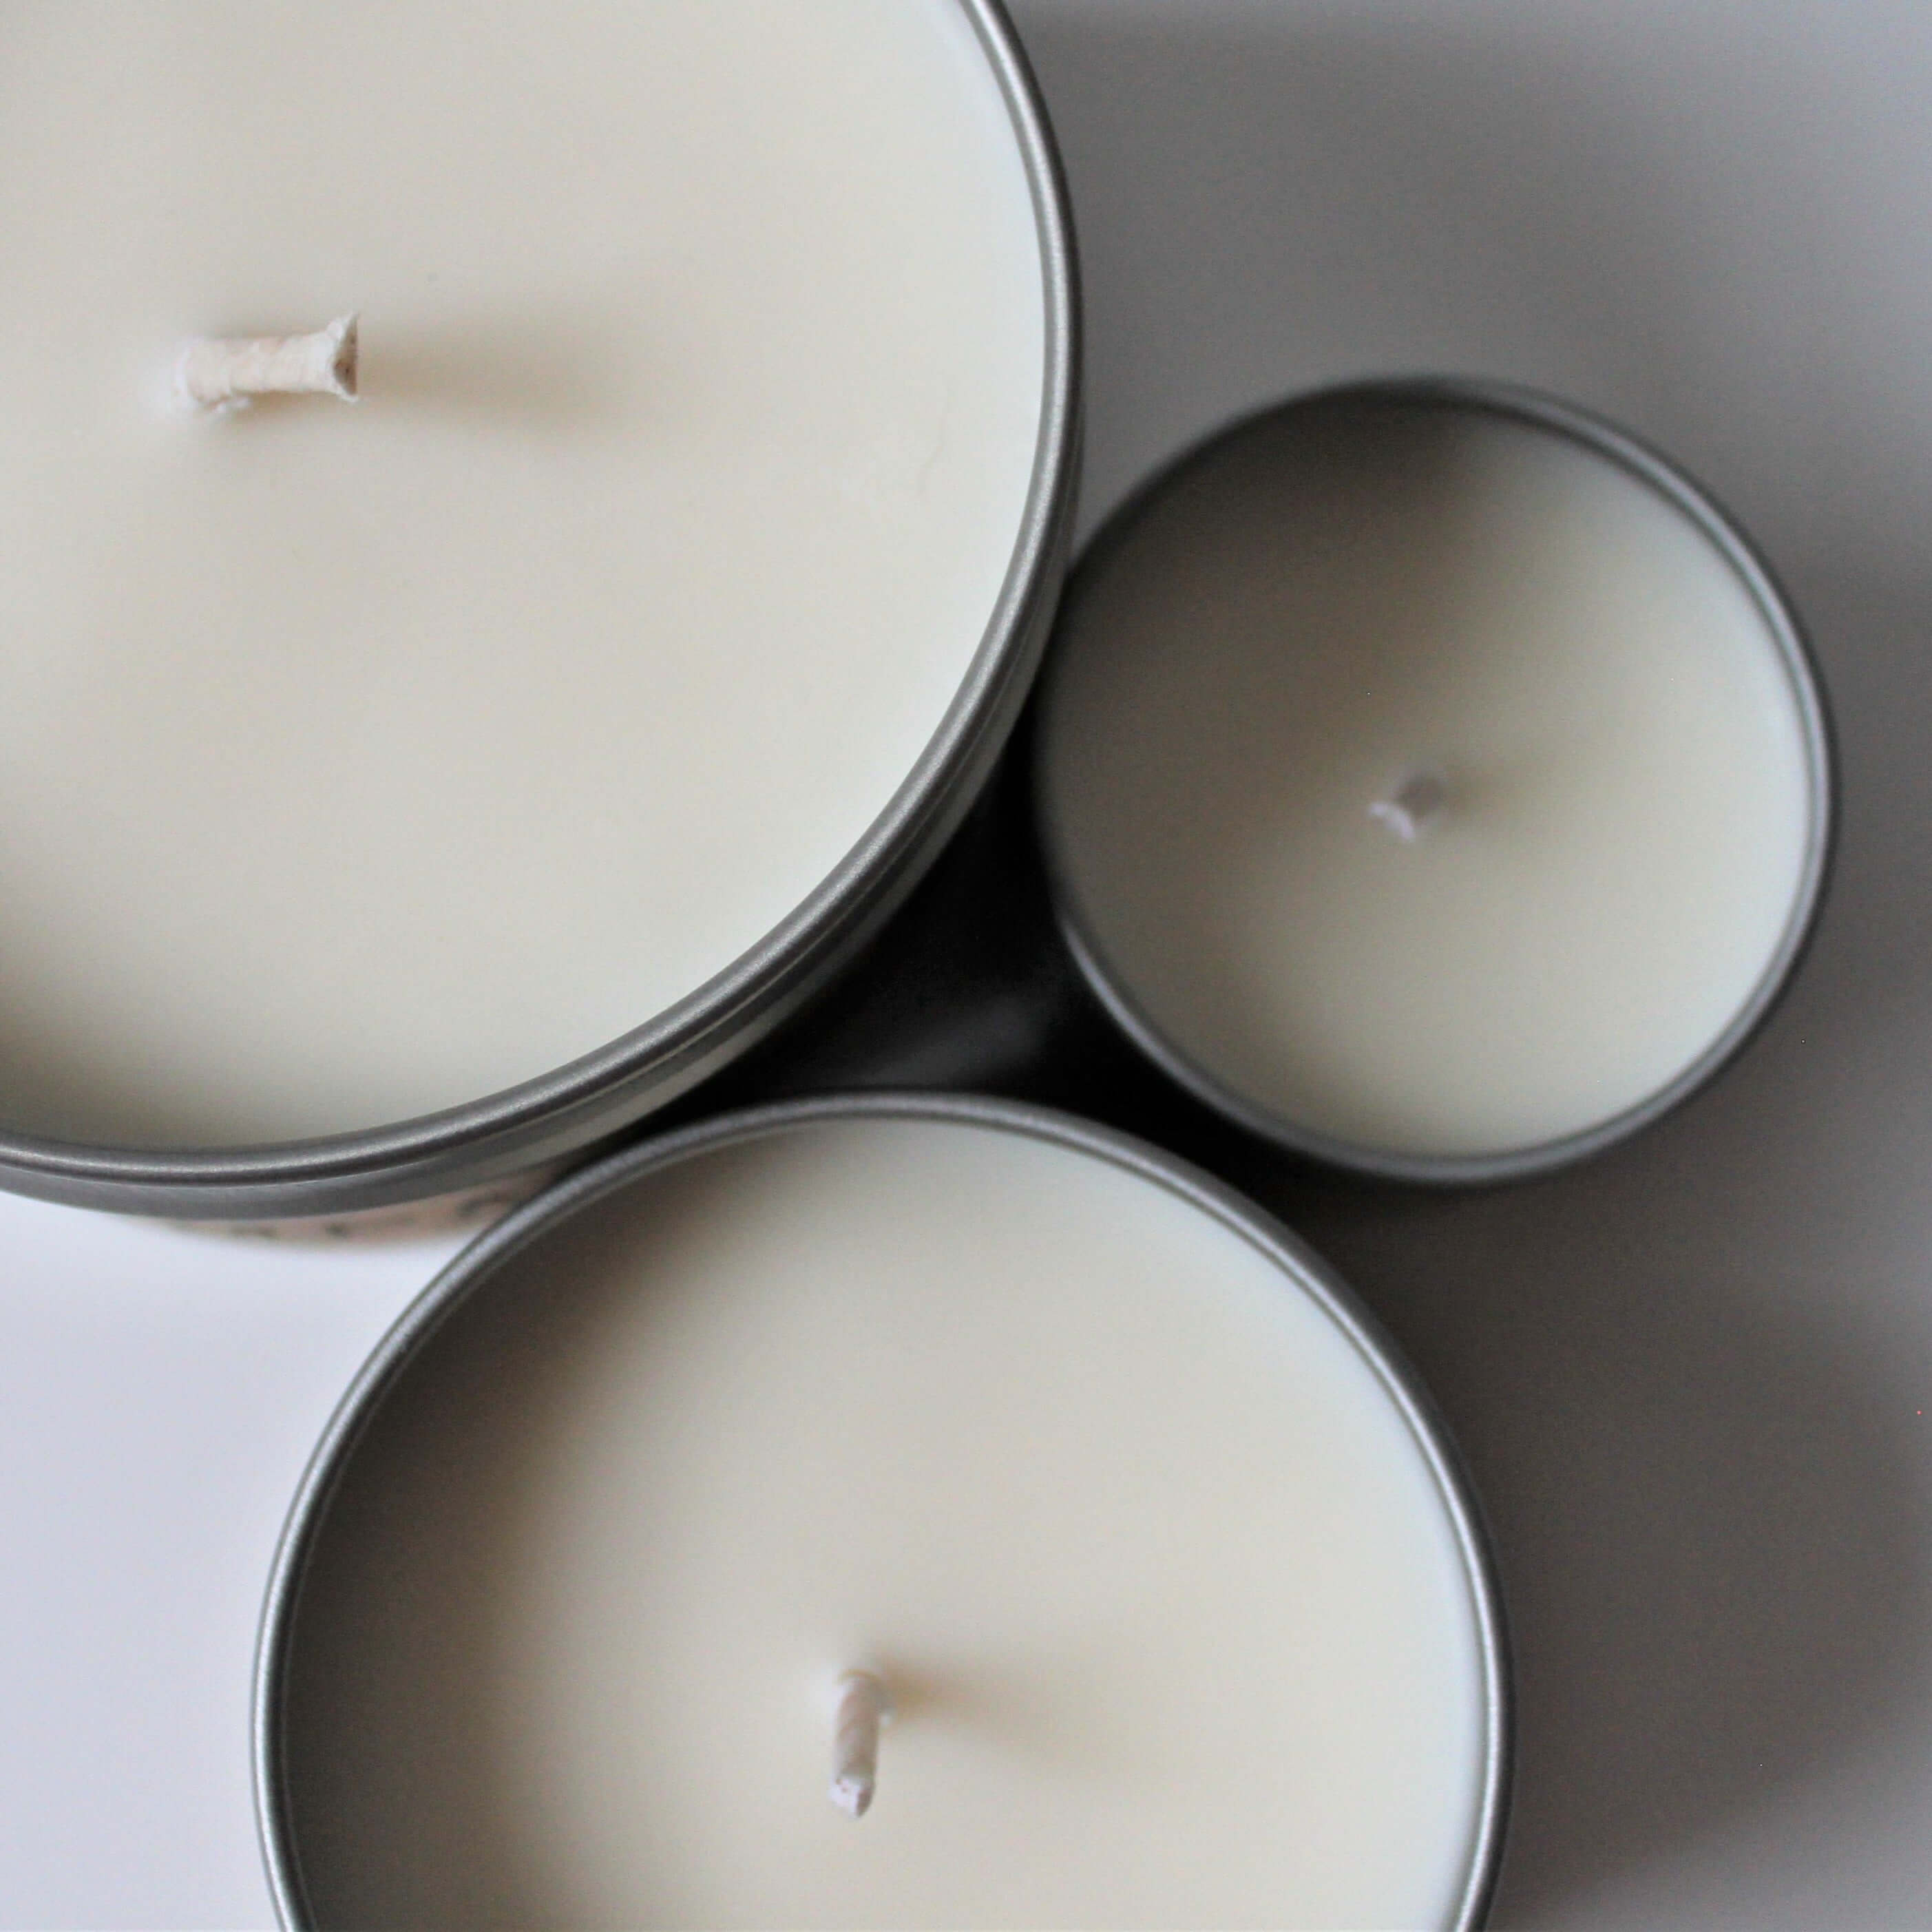 refillable soy candle, companies that donate to non-profits, companion soy candle, lavender soy candle, vanilla soy candle, companion 6 oz candle, long lasting candles, candles with a strong throw, wedding favor ideas, wedding favor candles, gift ideas, pet candles, dog candles, aromatherapy for animals, aromatherapy for pets, aromatherapy for cats, aromatherapy for dogs